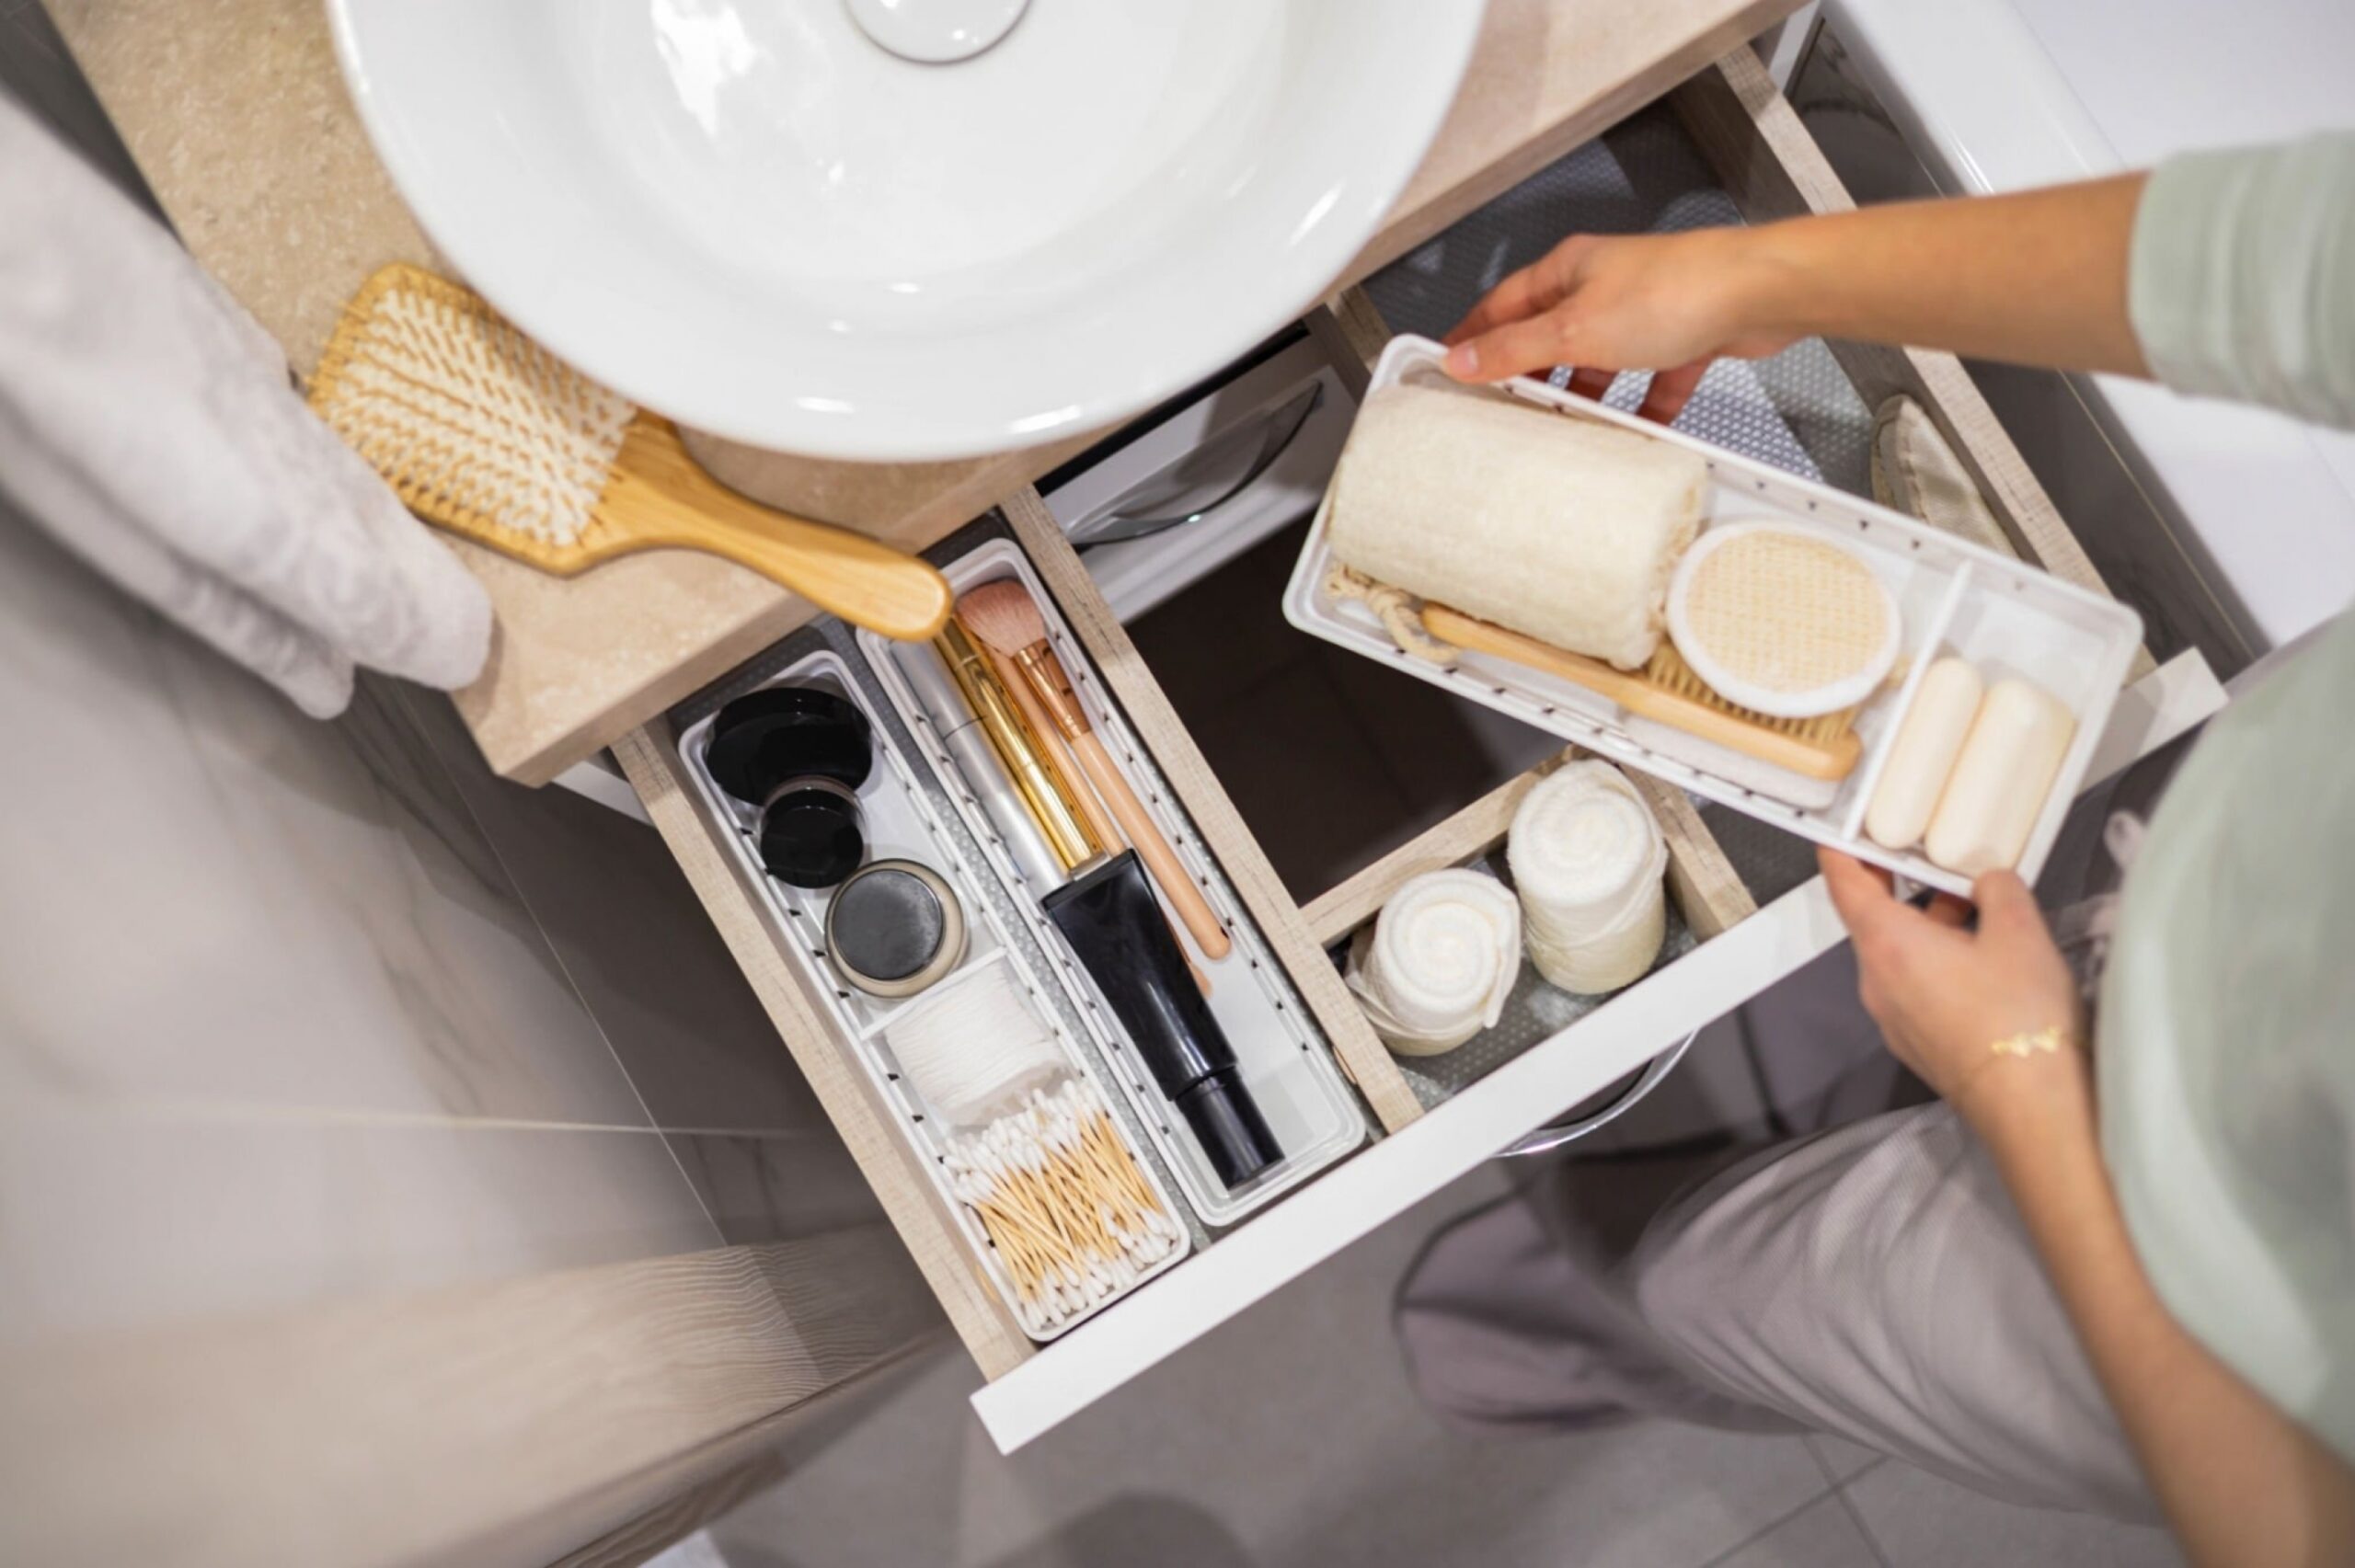 Woman neatly organizing bathroom amenities and toiletries in drawer